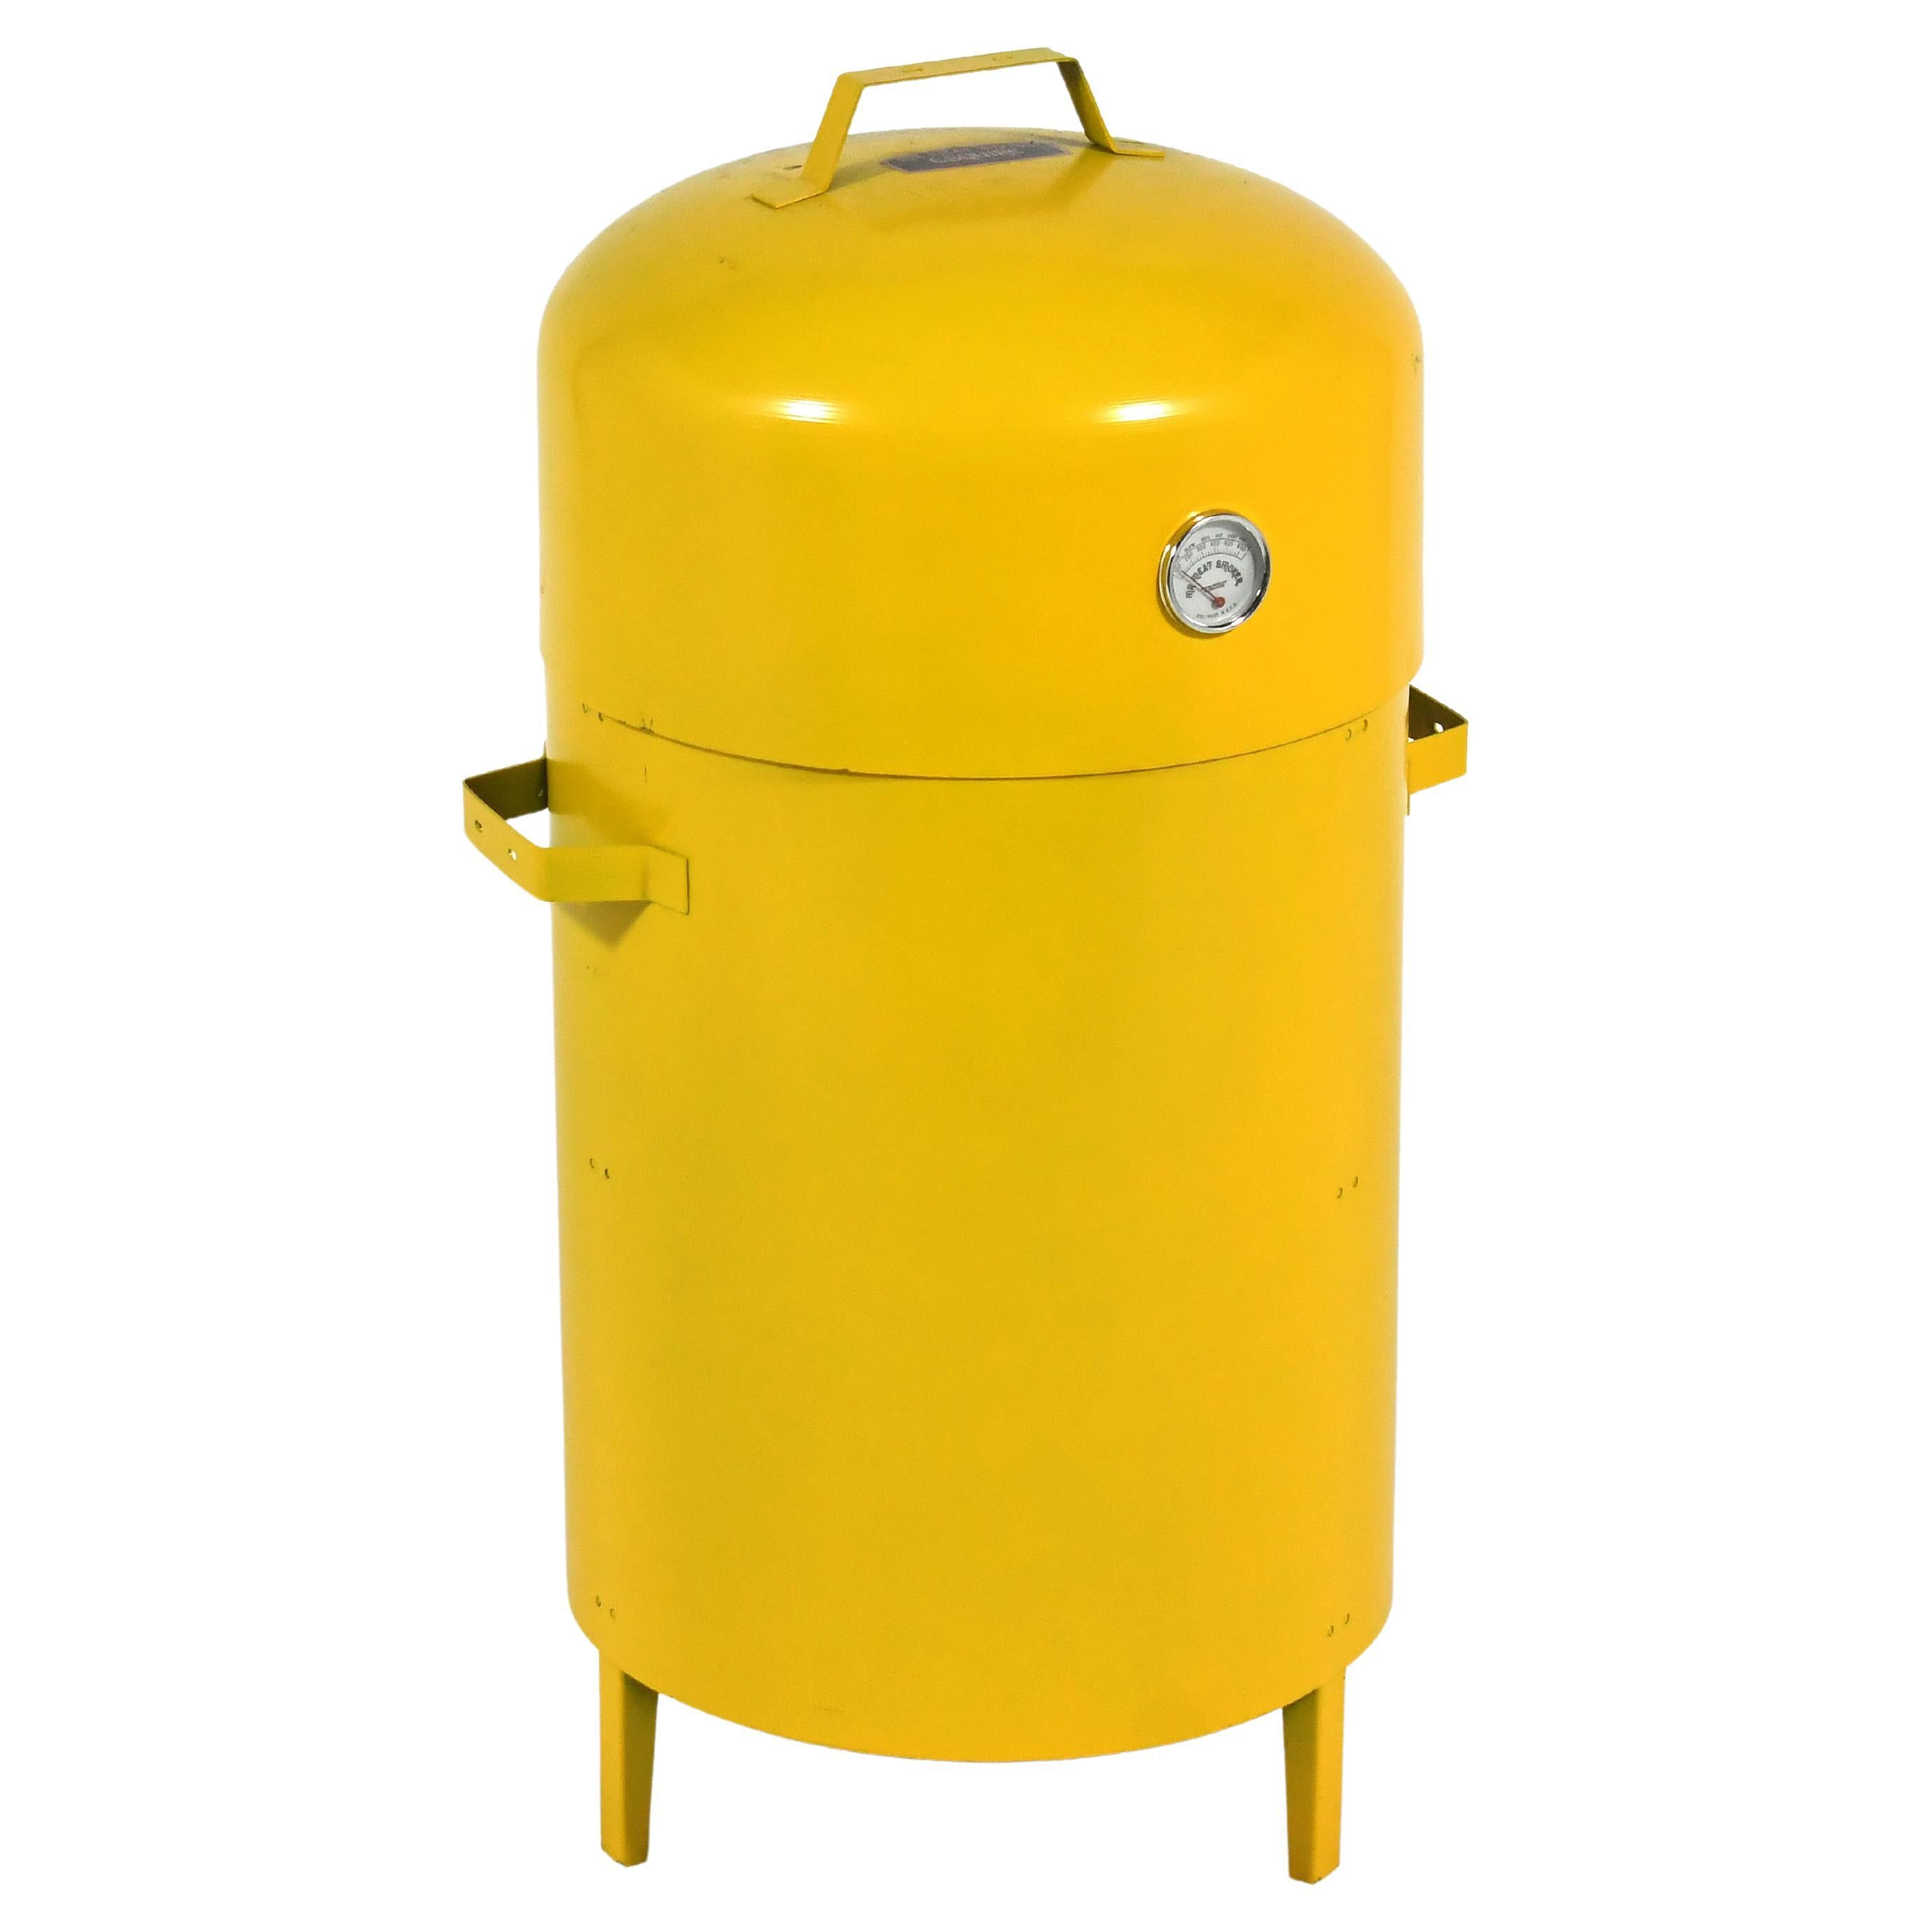 Yellow Mr. Meat Smoker Barbecue Grill / Cooker M.I.B. For Sale